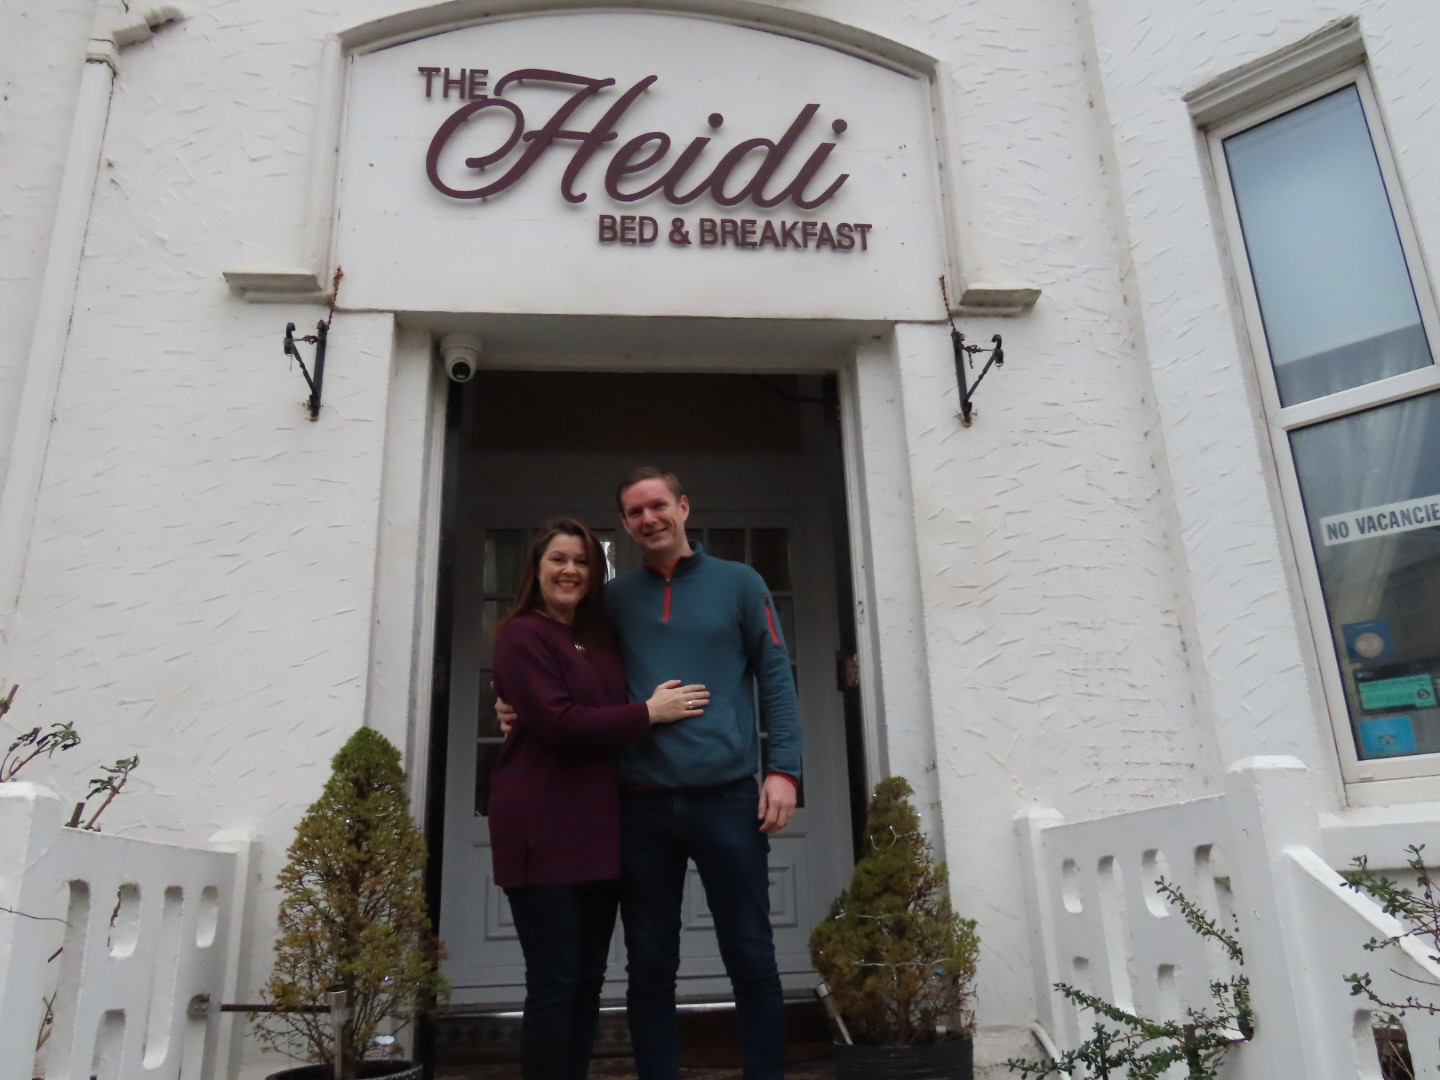 The Heidi B&B owners Michelle and Al Michie. Photo by Andrew Brown Media